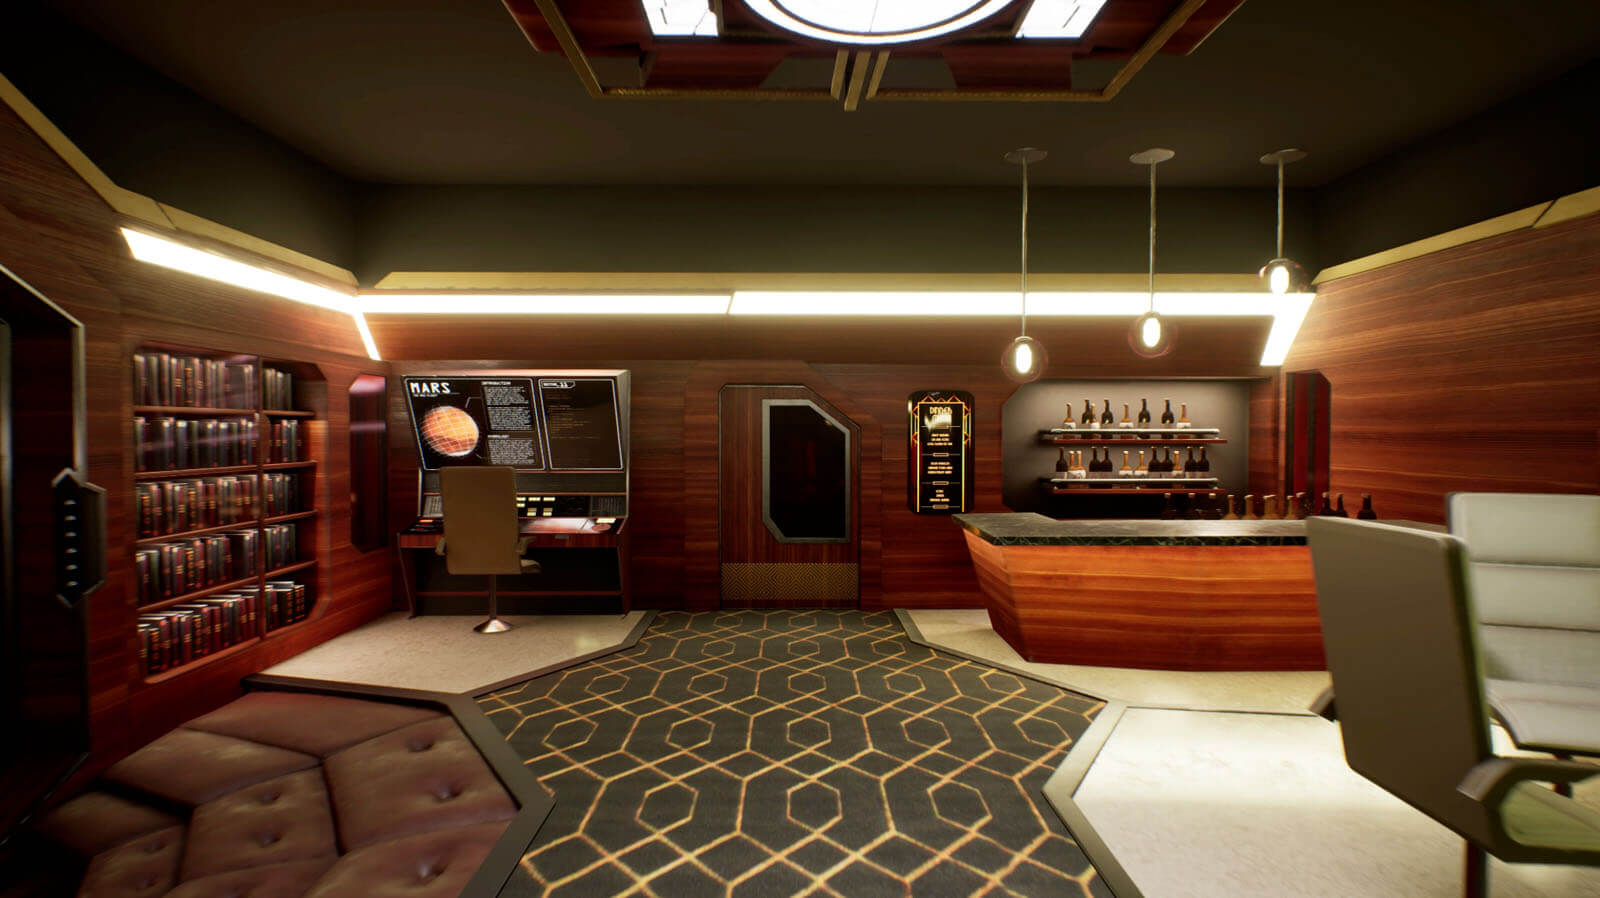 Panned-out view of a futuristic ship's living quarters with a desk, bar, and seating